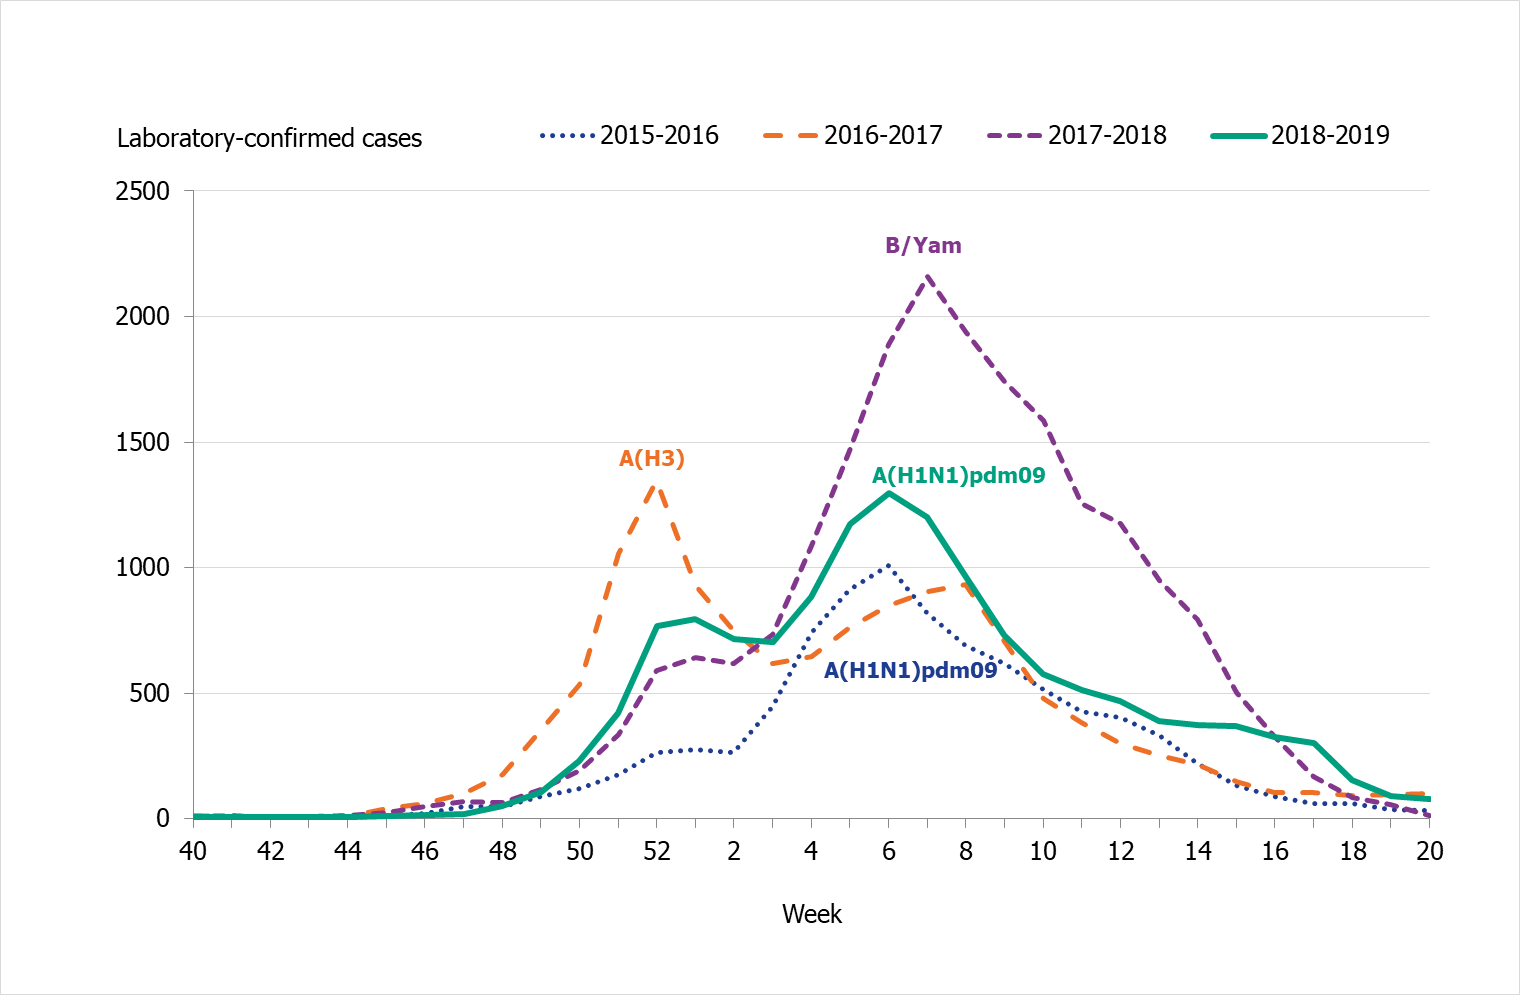 Graph showing the weekly number of laboratory-confirmed cases of influenza (all types) and the dominating influenza type(s) per season, 2015–2019.